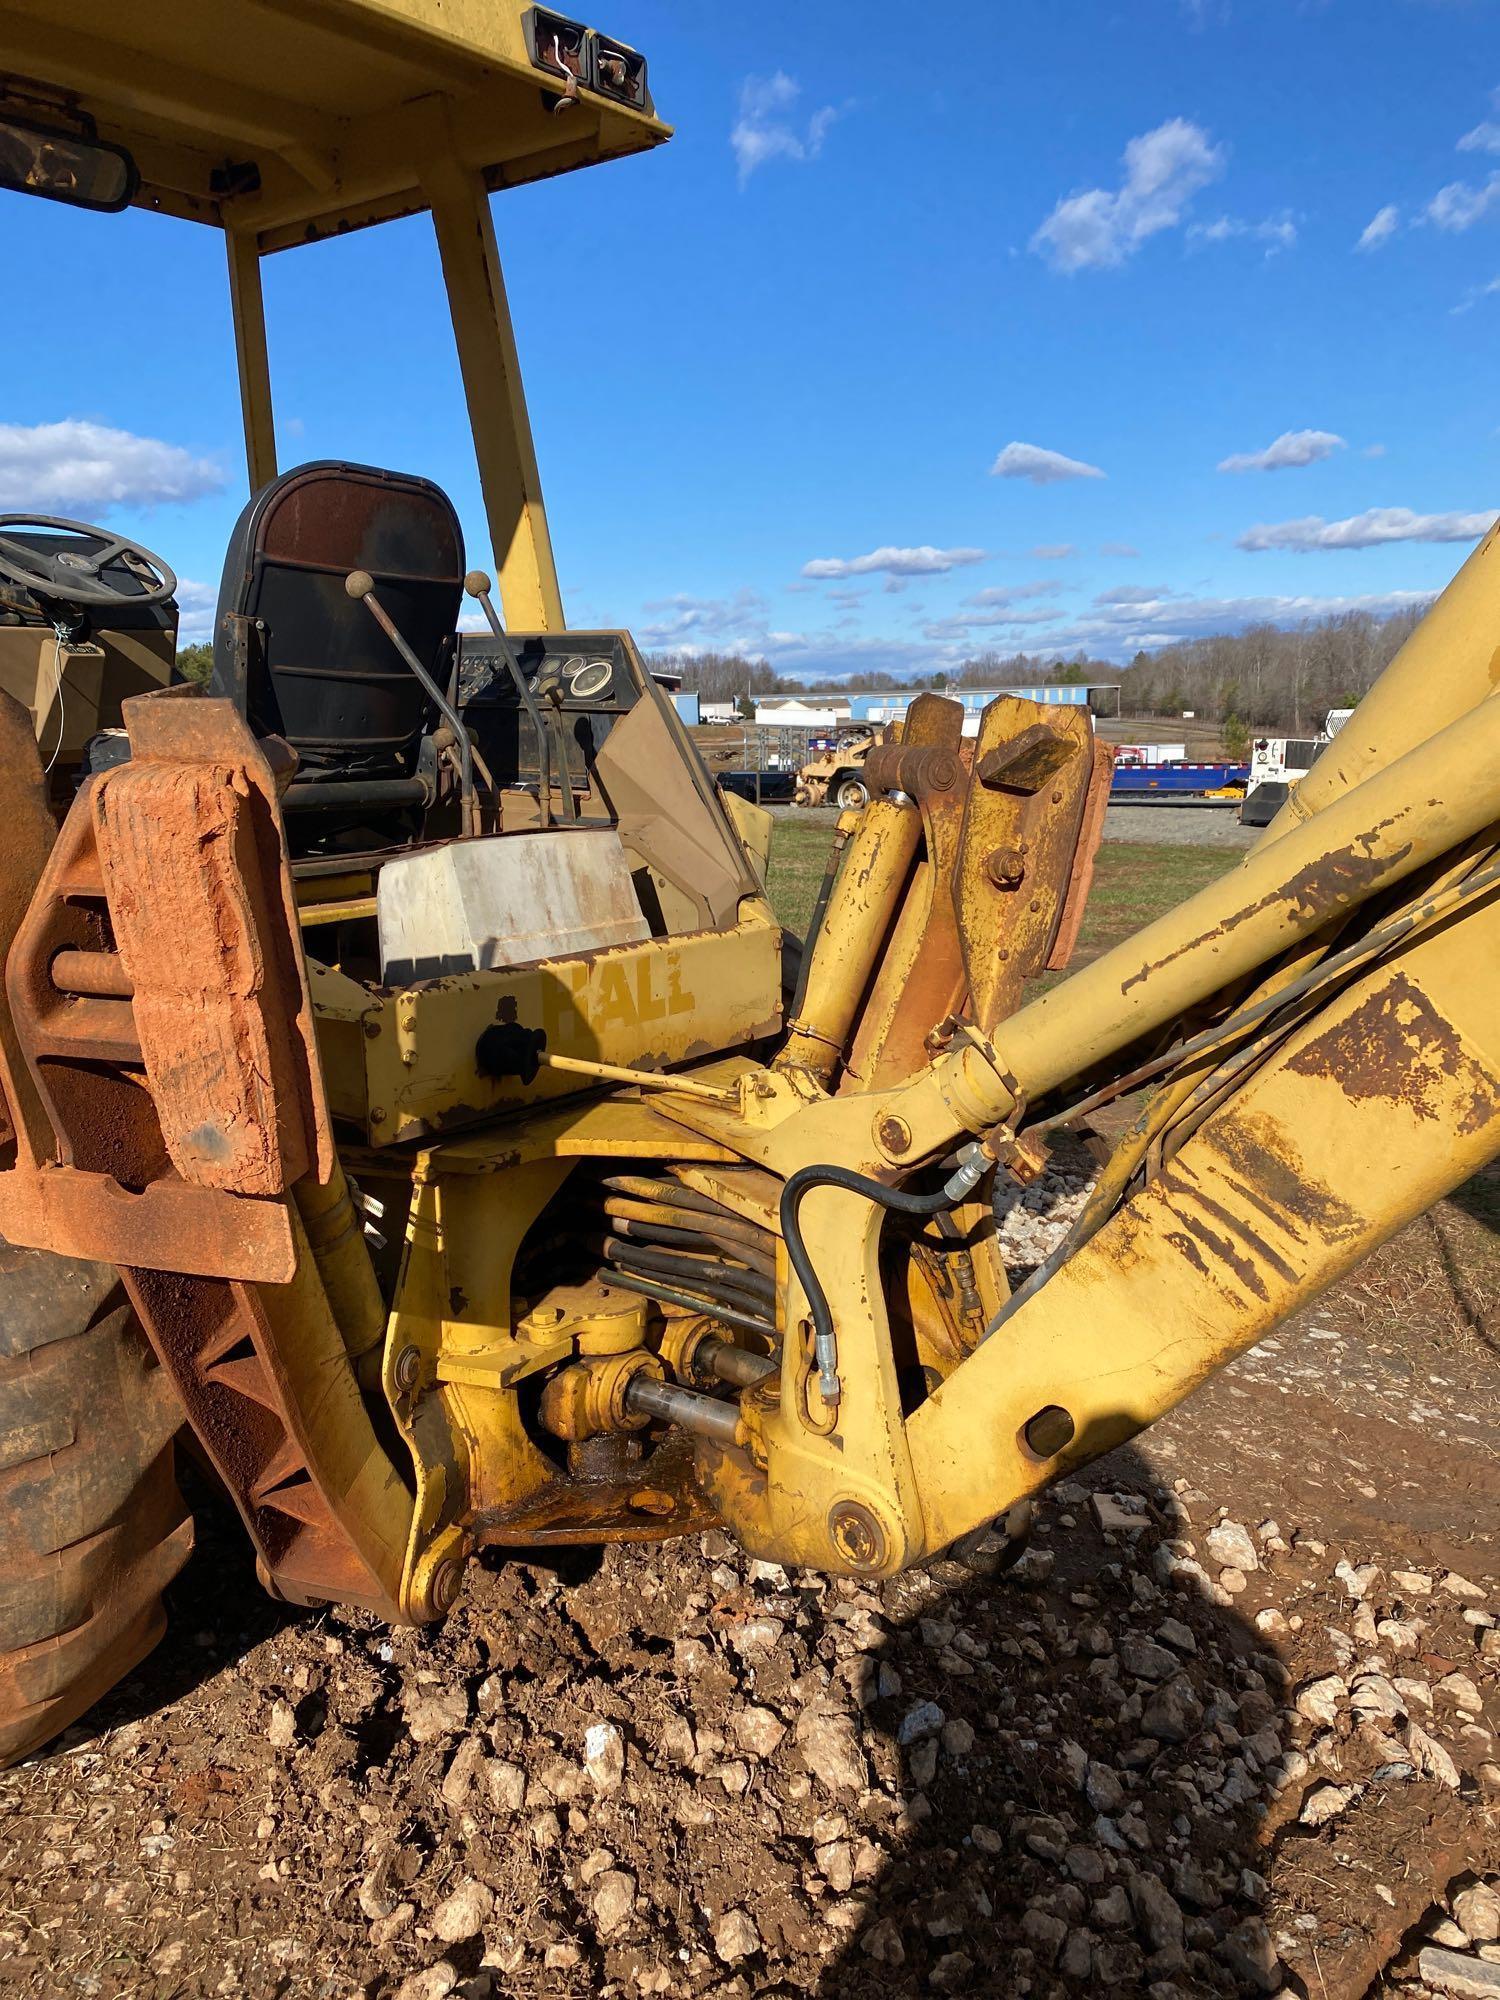 Caterpillar 416 TURBO 4x4 Loader Backhoe - SELLING ABSOLUTE